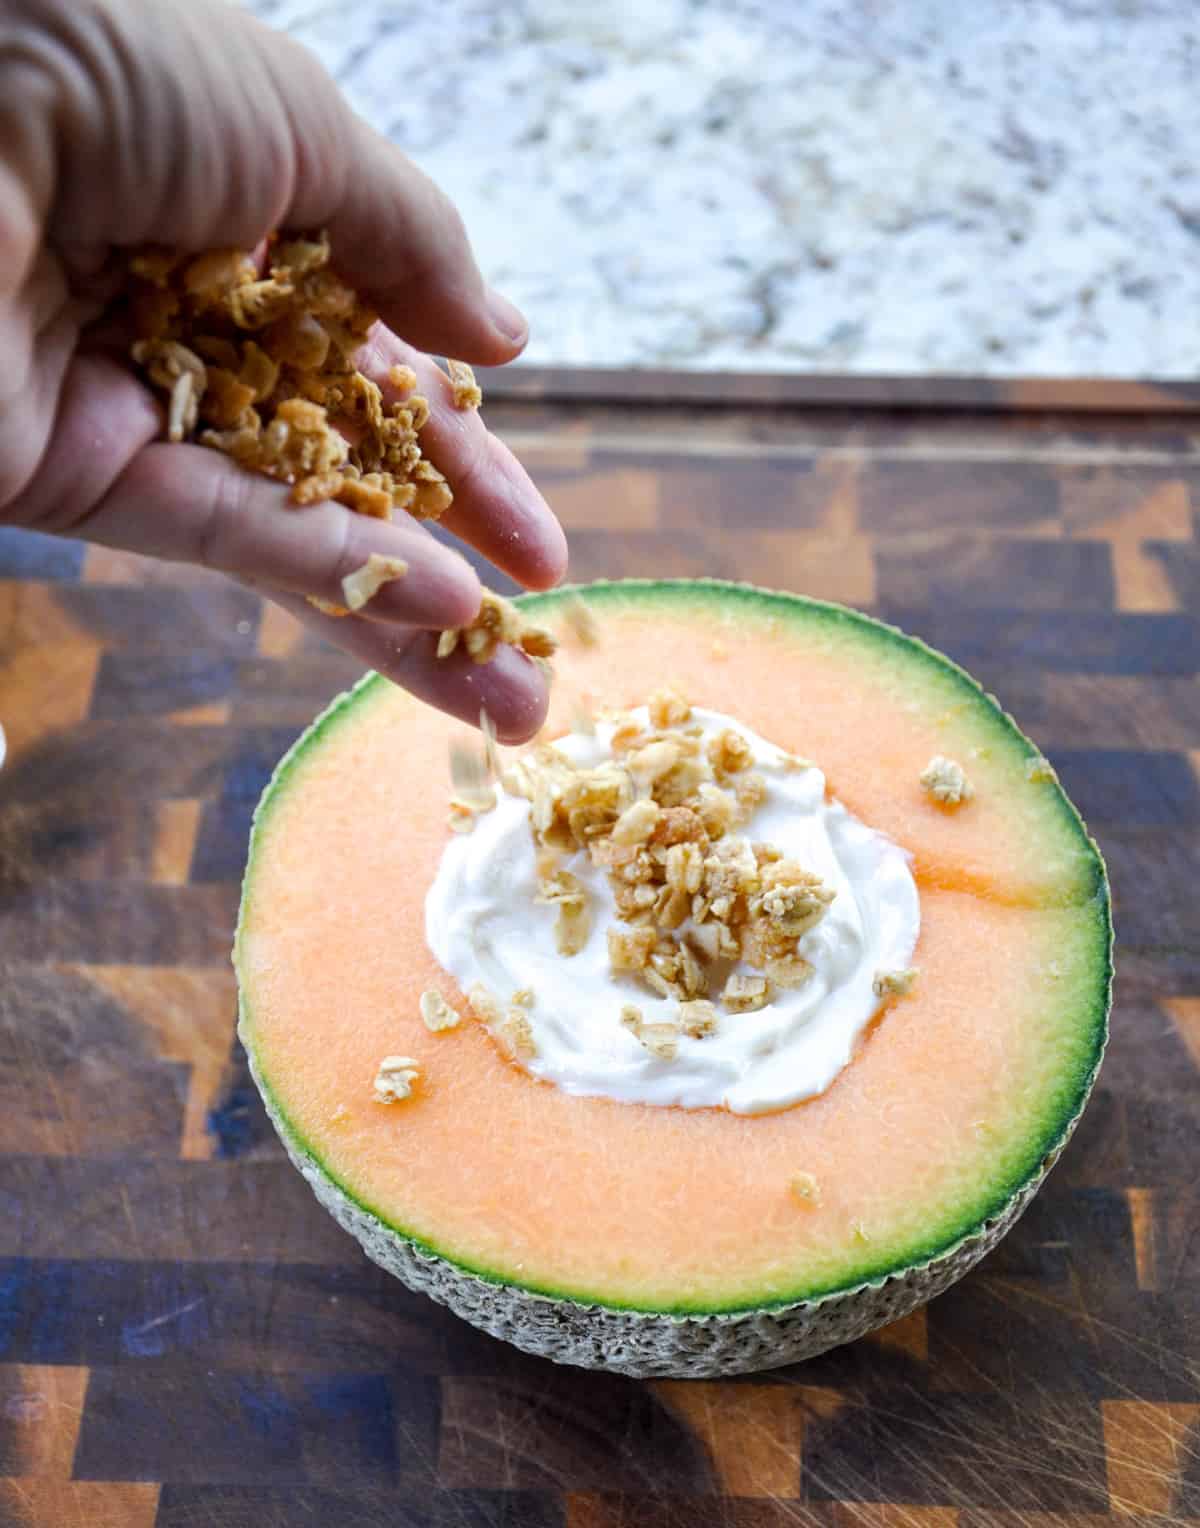 Cantaloupe Breakfast Bowls. Perfect for dessert too! Load the center with greek yogurt and top with fresh berries and granola. YUM!